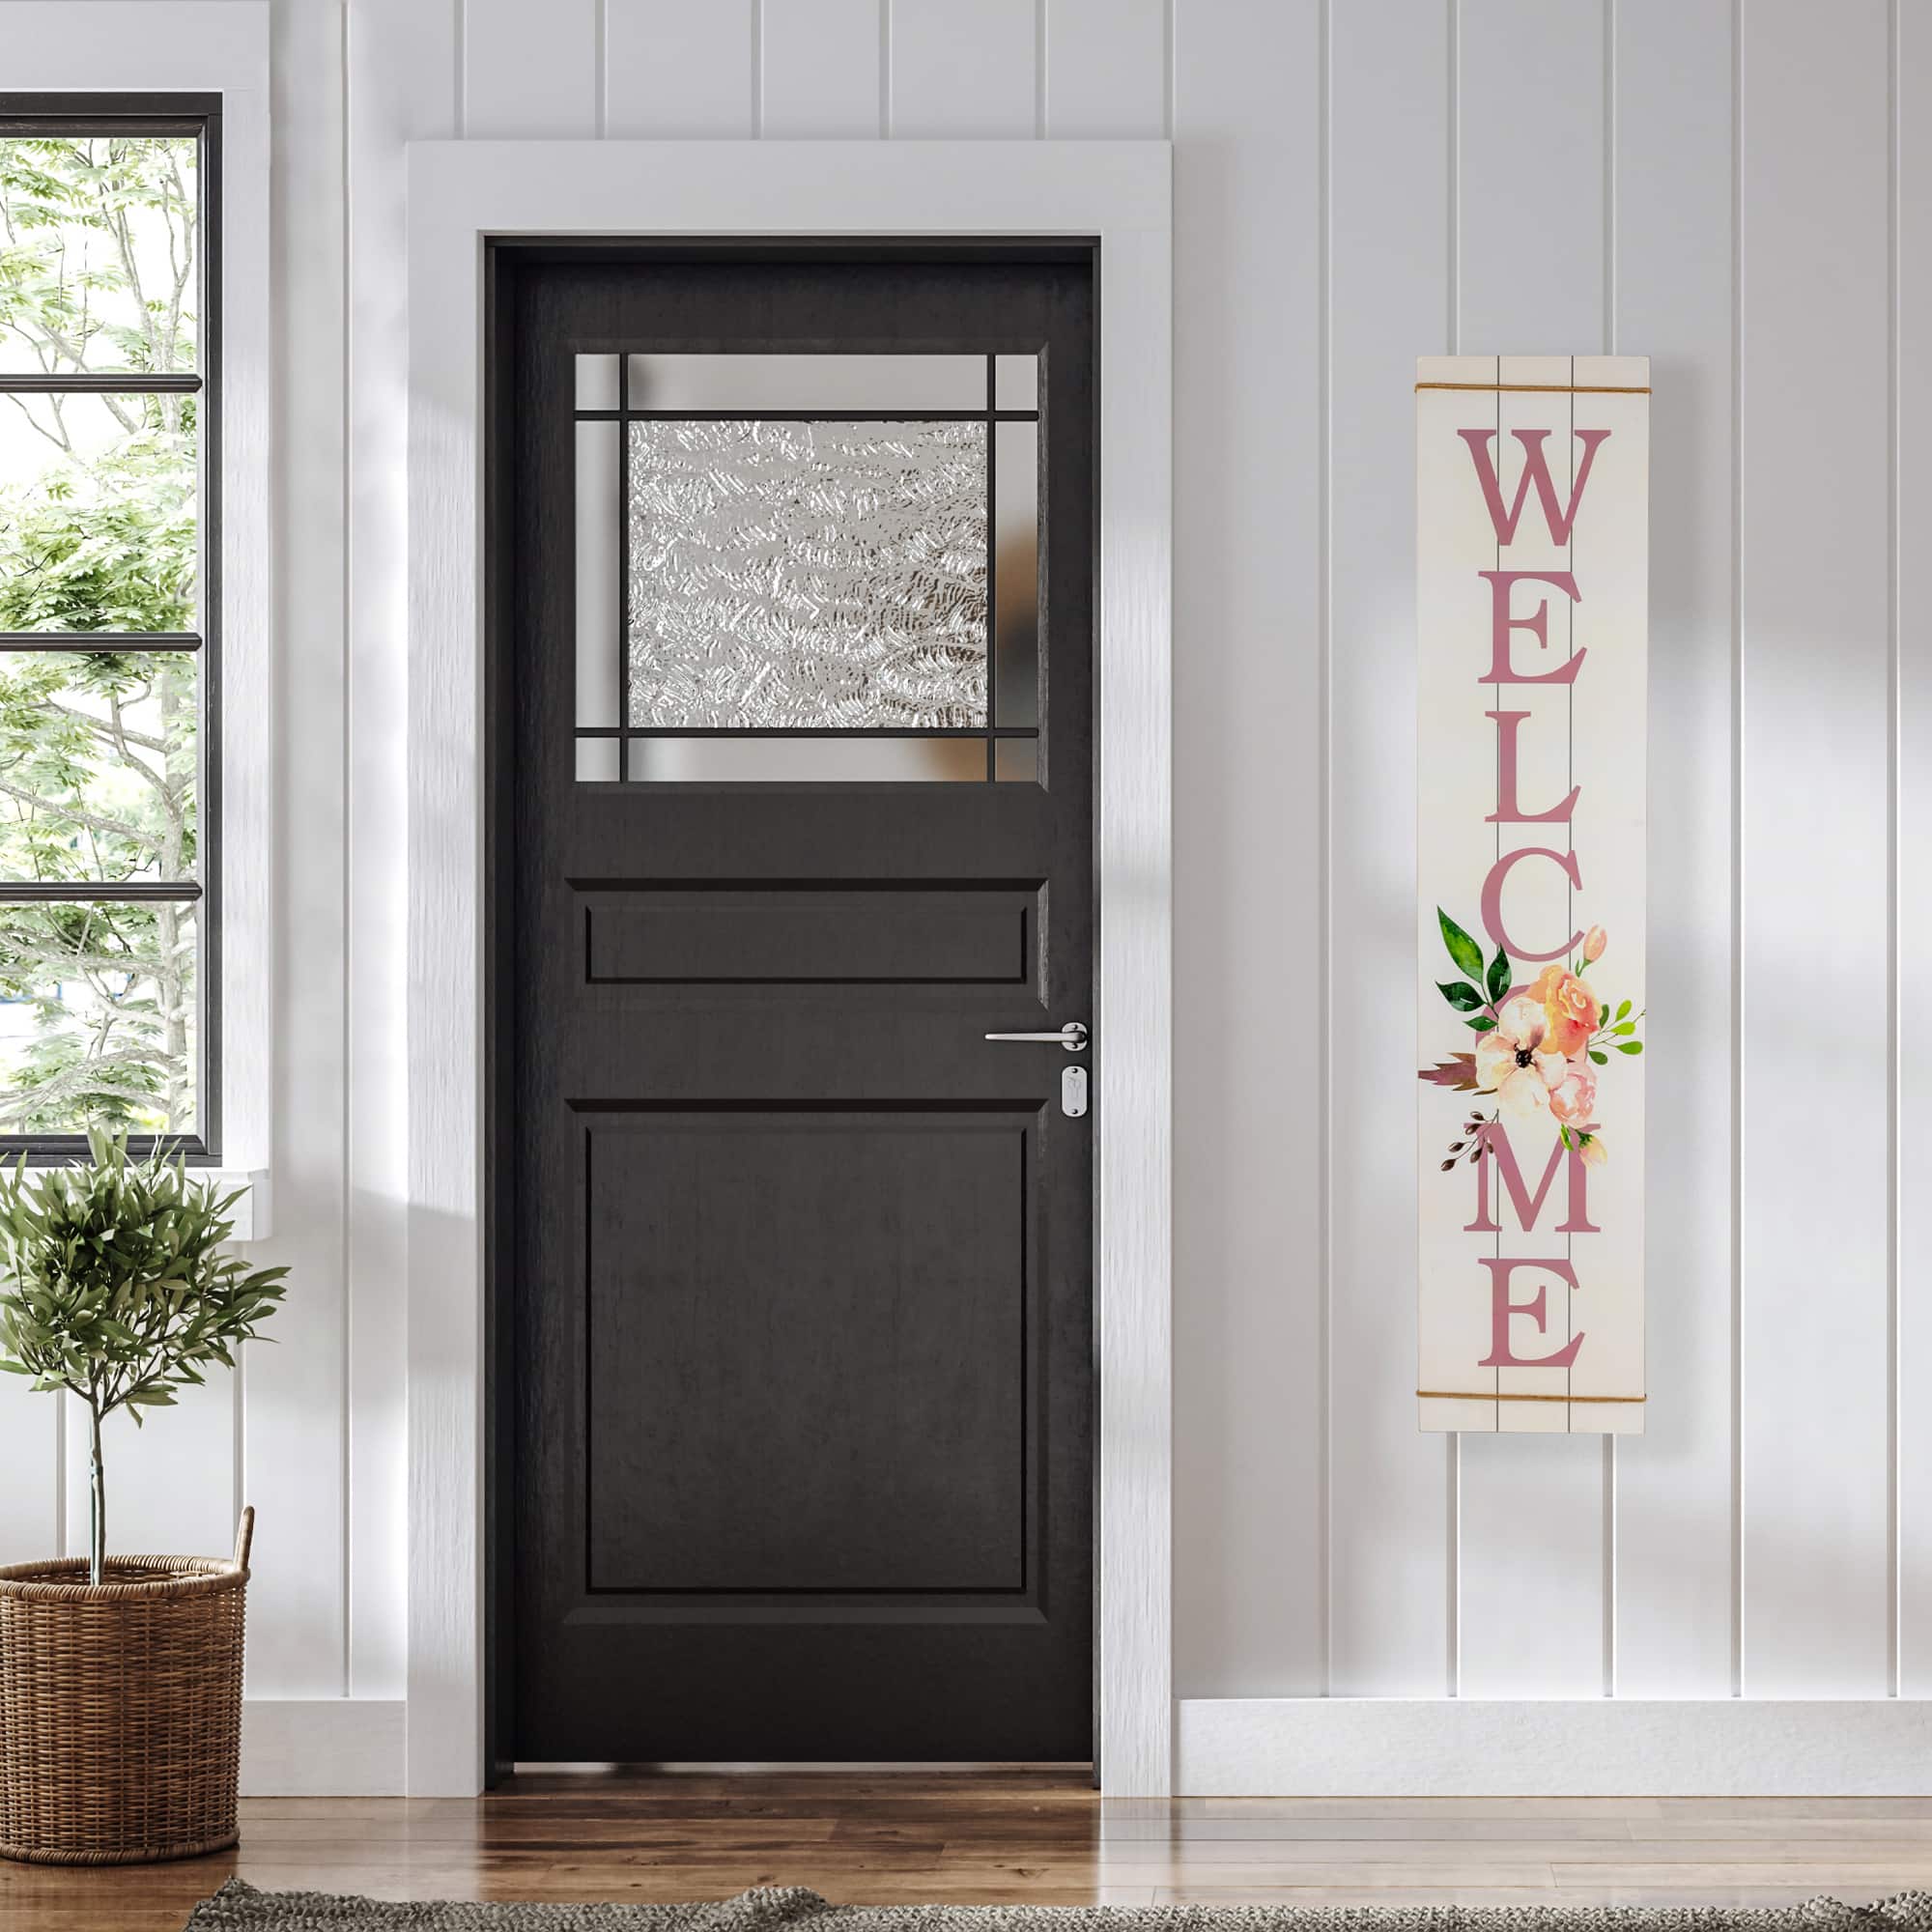 4ft. Floral Welcome Wooden Spring Wall Sign